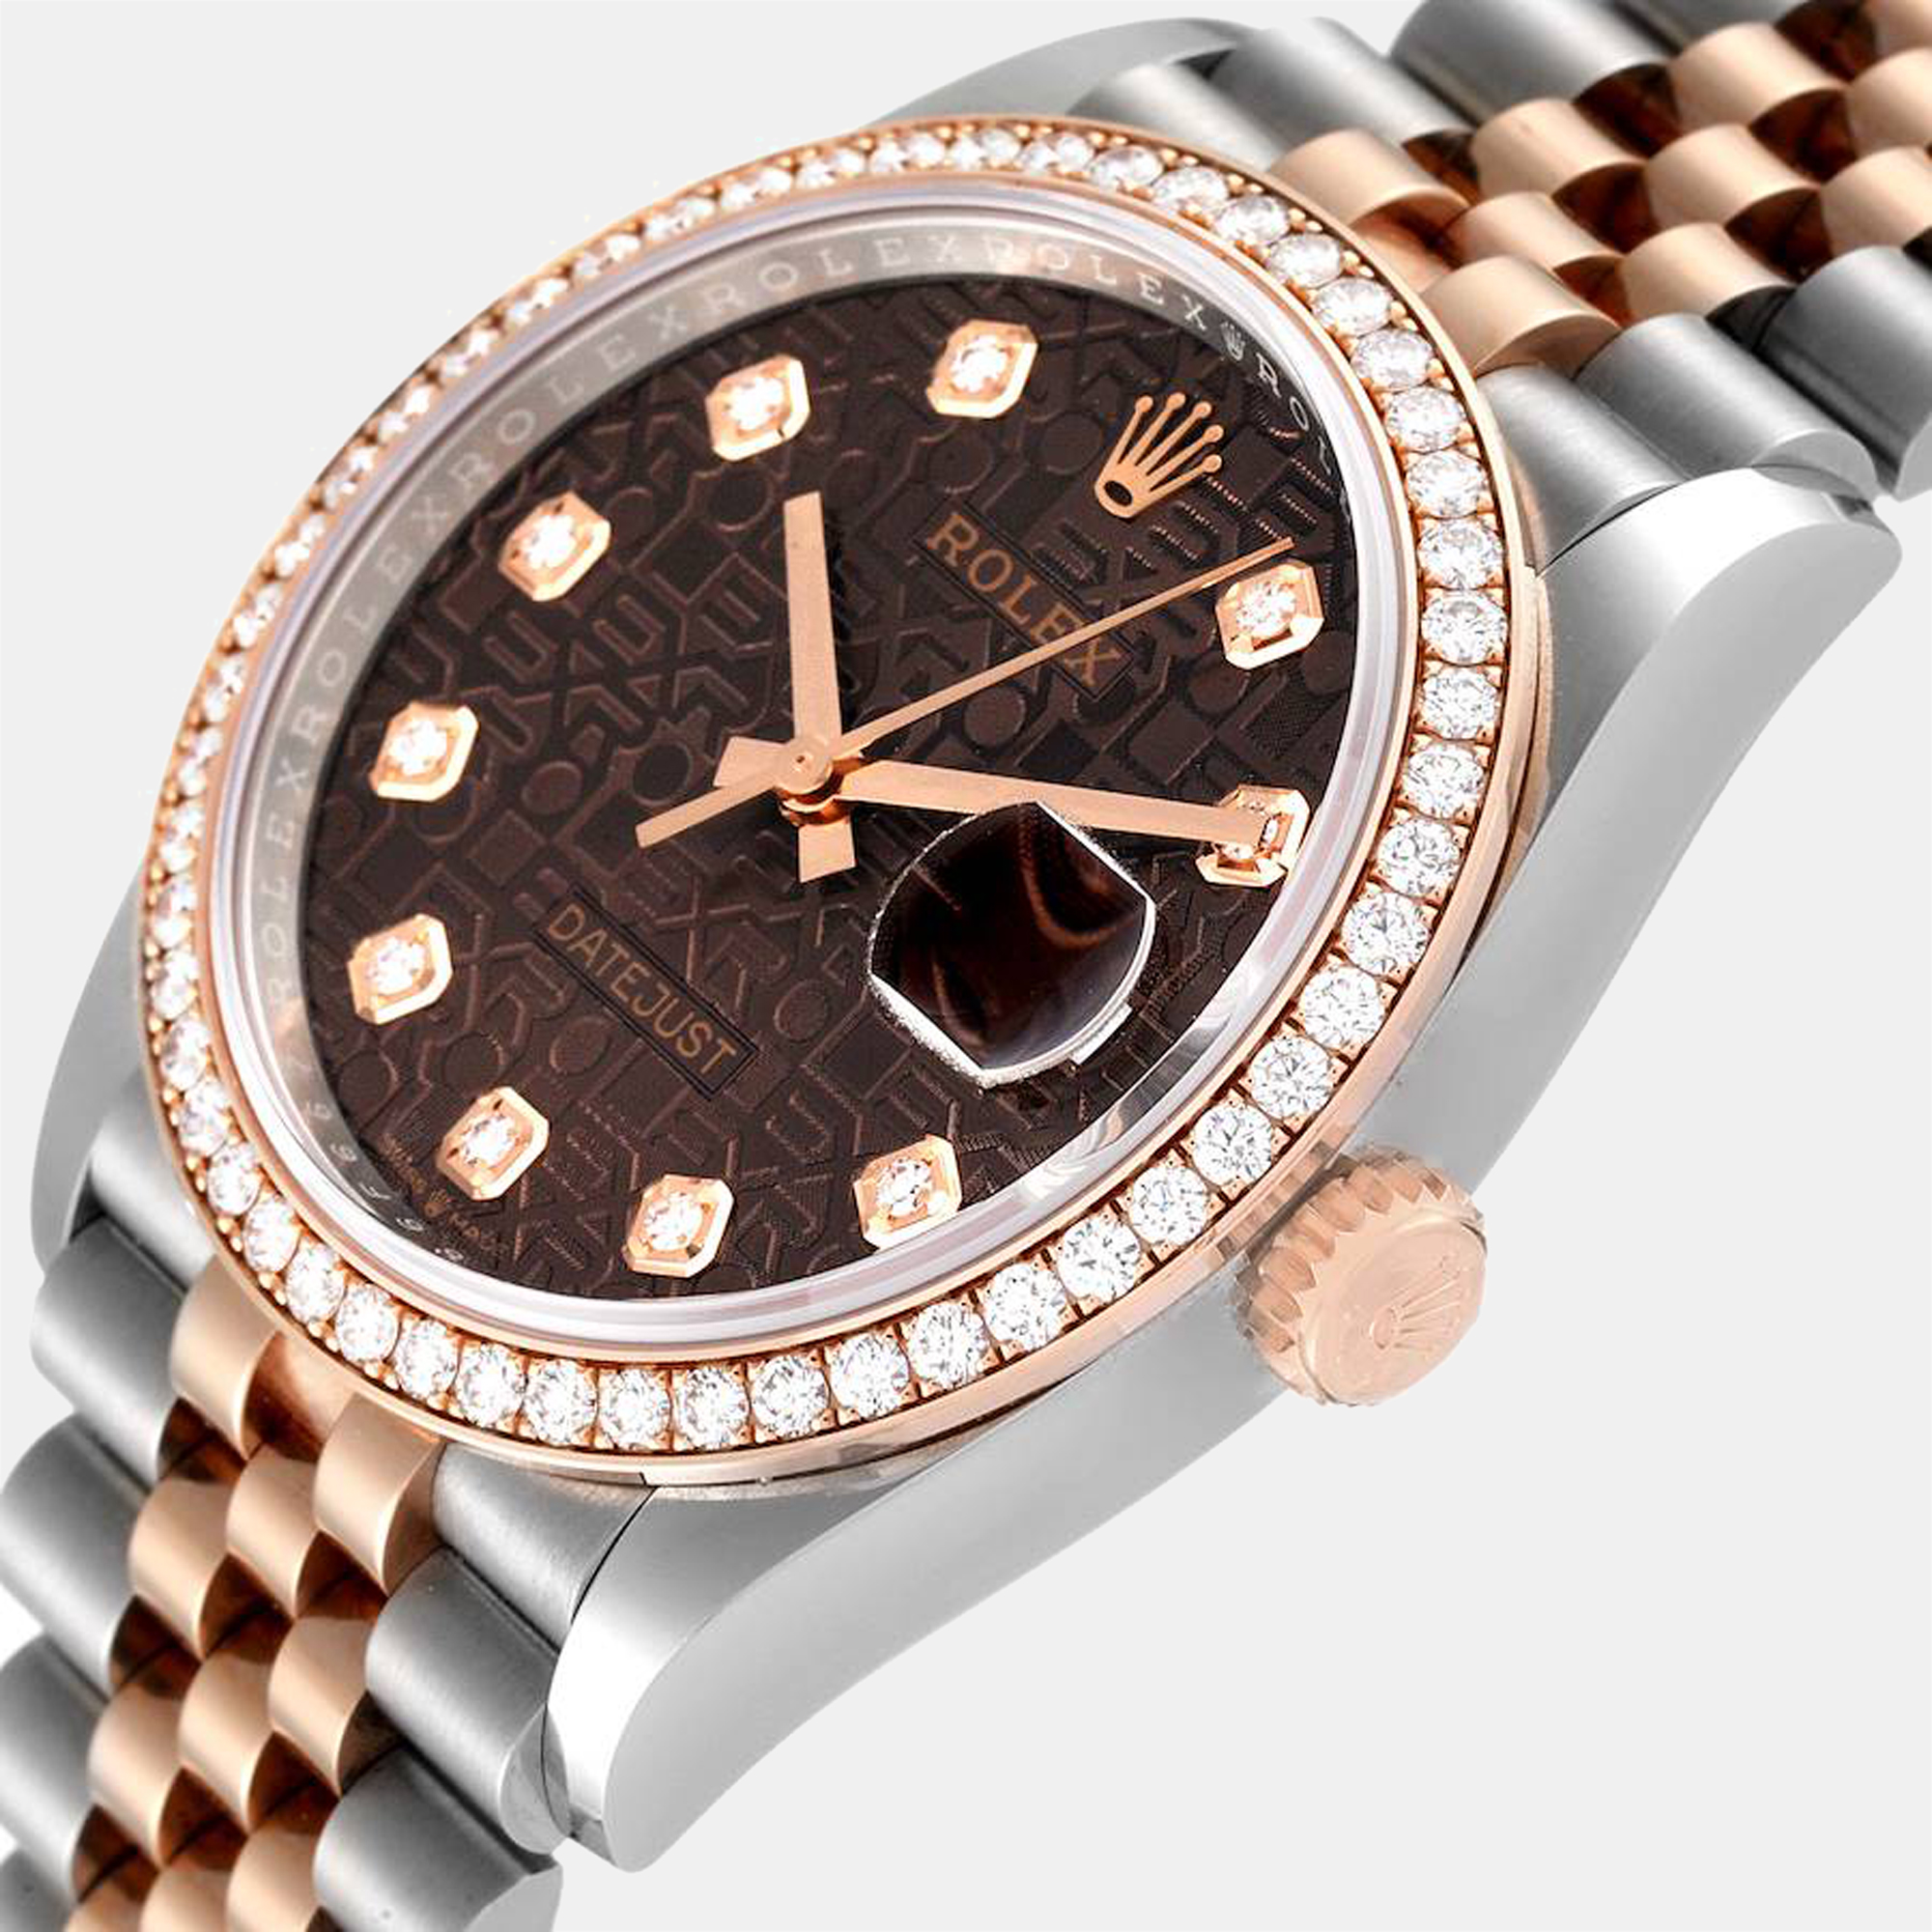 

Rolex Brown Diamonds 18K Rose Gold And Stainless Steel Datejust 126281 Automatic Men's Wristwatch 36 mm